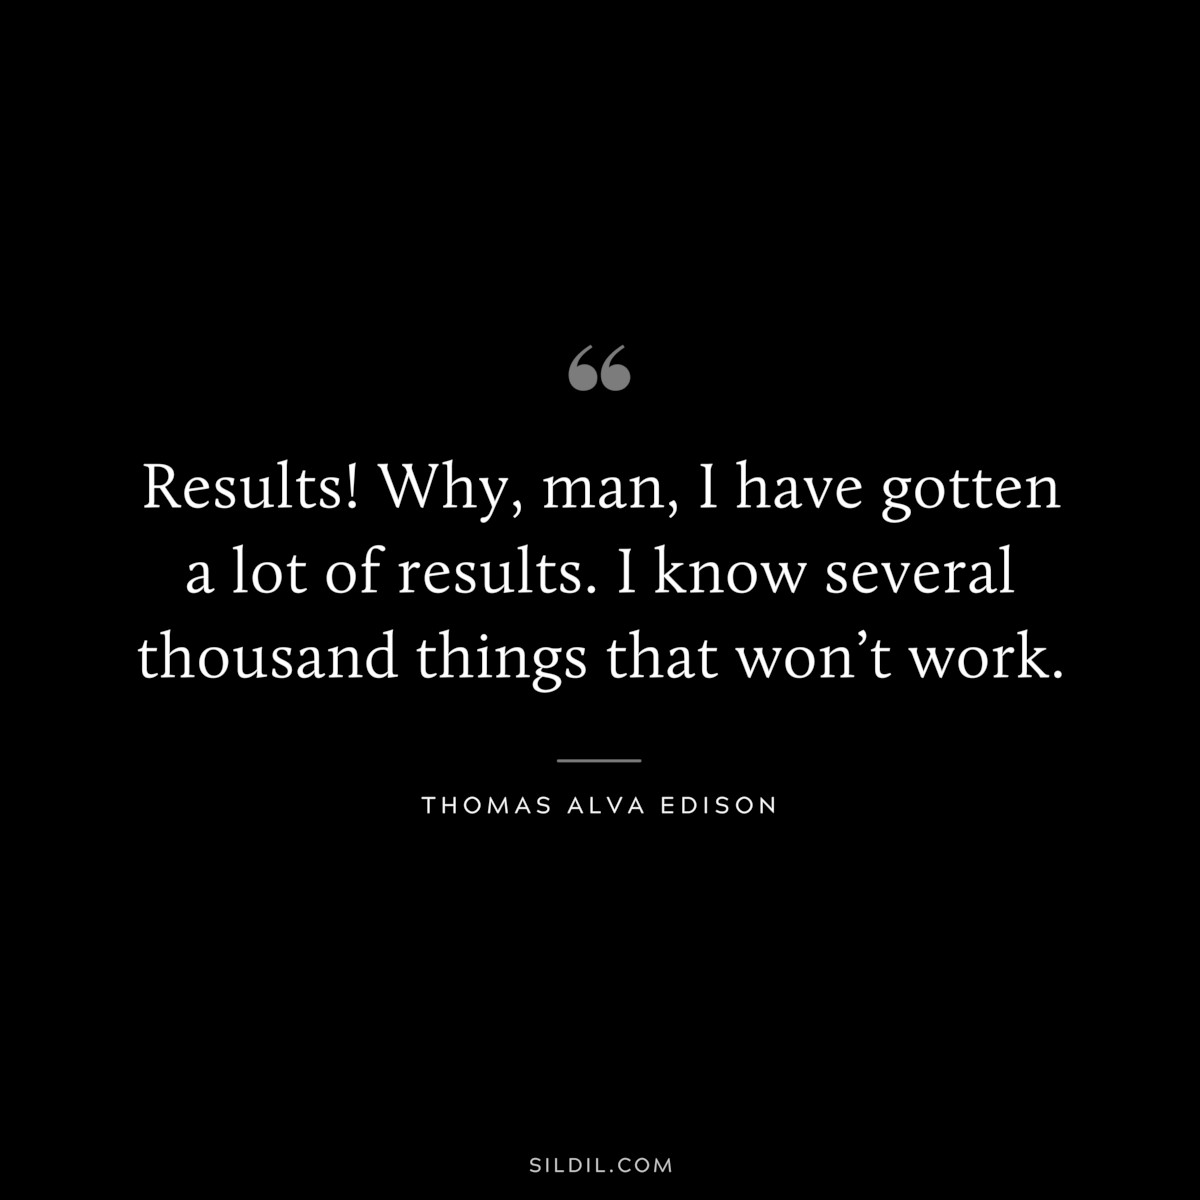 Results! Why, man, I have gotten a lot of results. I know several thousand things that won’t work. ― Thomas Alva Edison